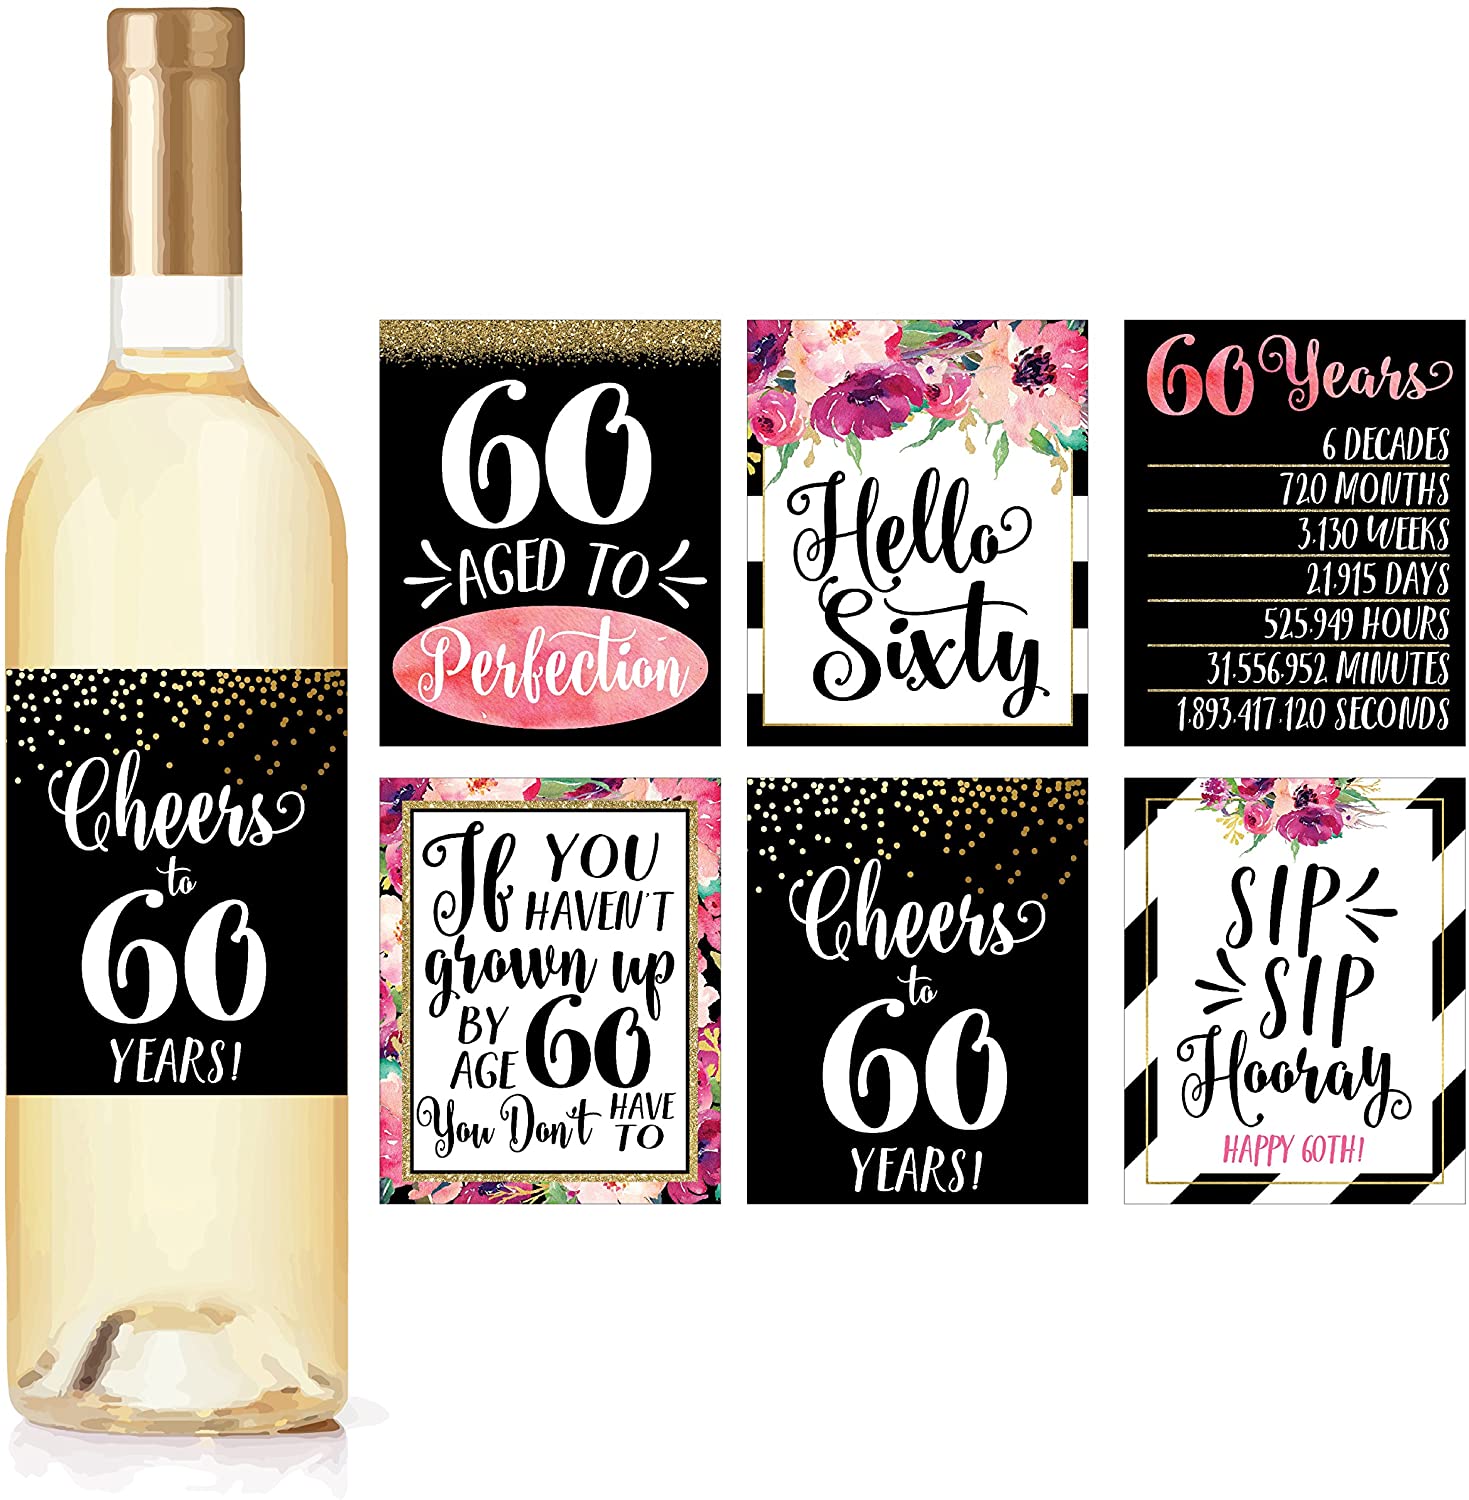 60th-birthday-gift-ideas-labels